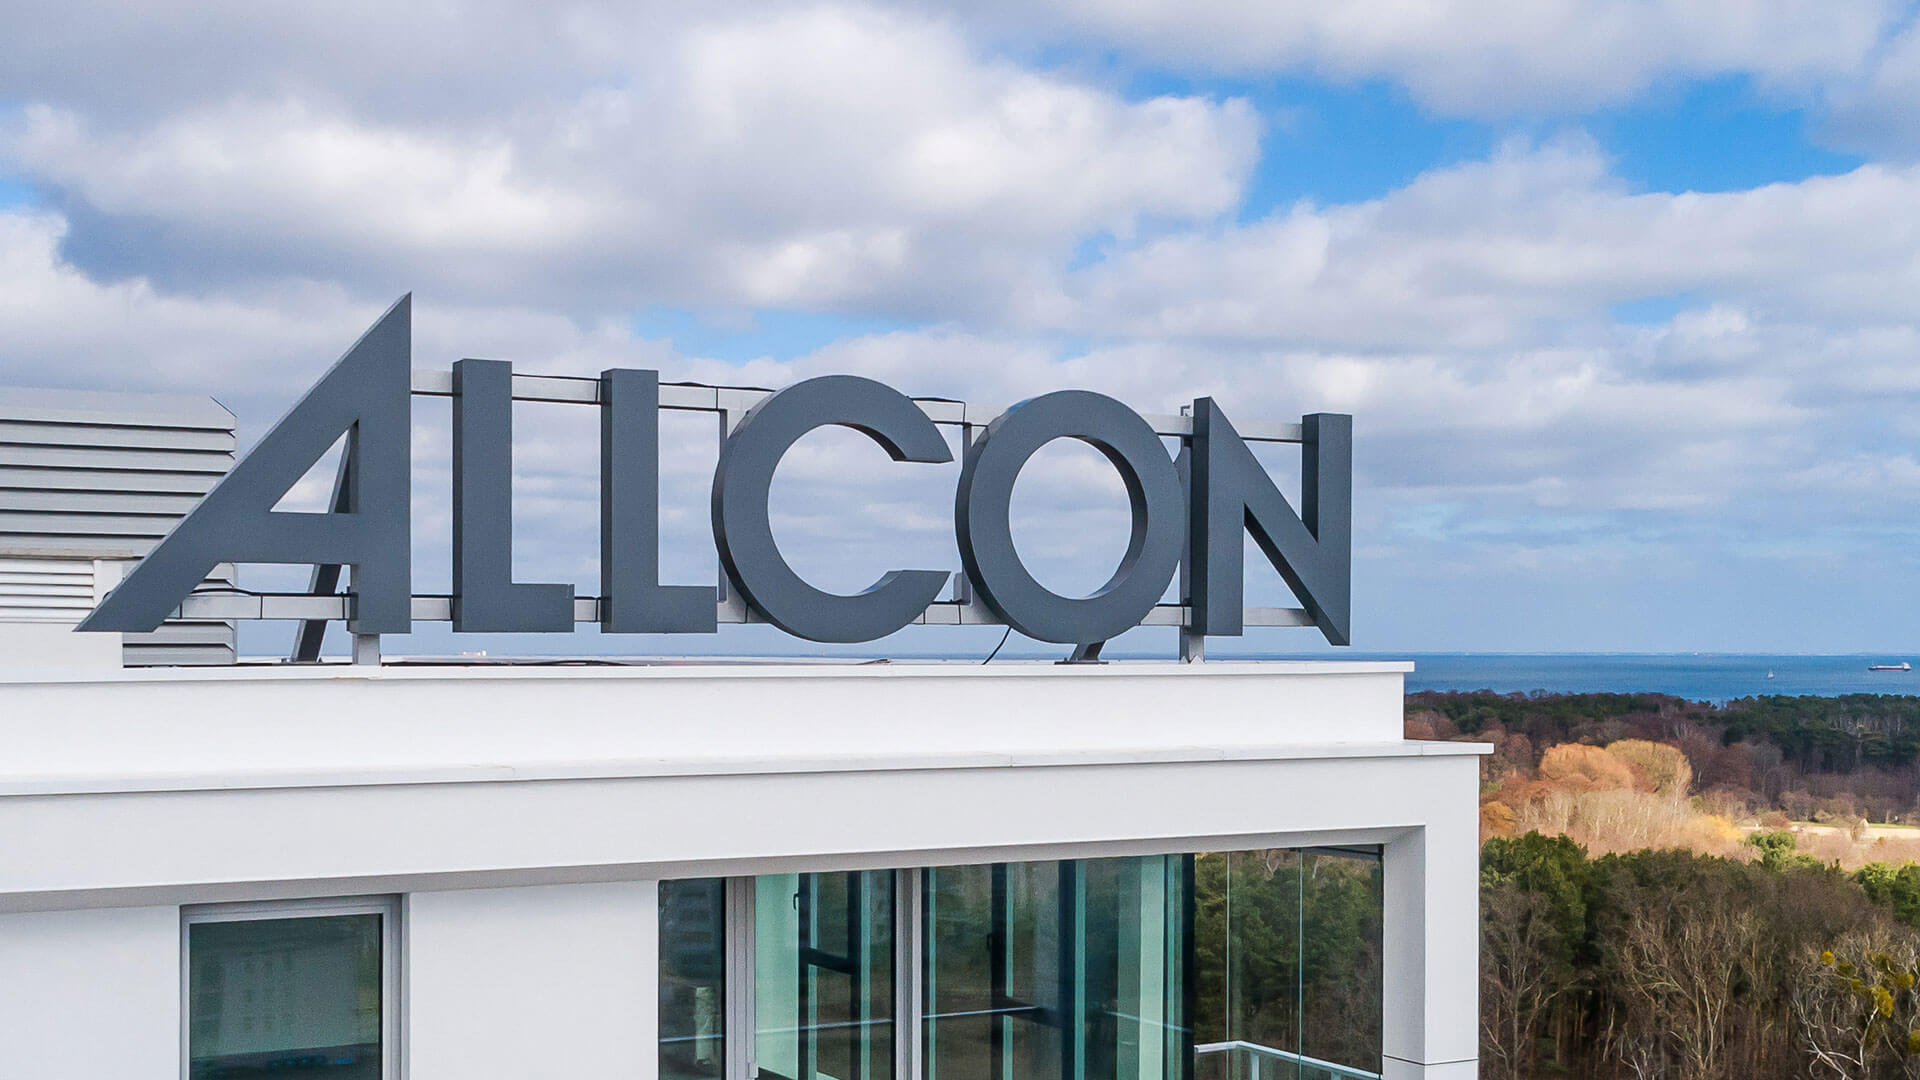 allcon-literal-large format - allcon-lit lettering - large-format-3d-from-plexi-lights-on-top-of-a-building